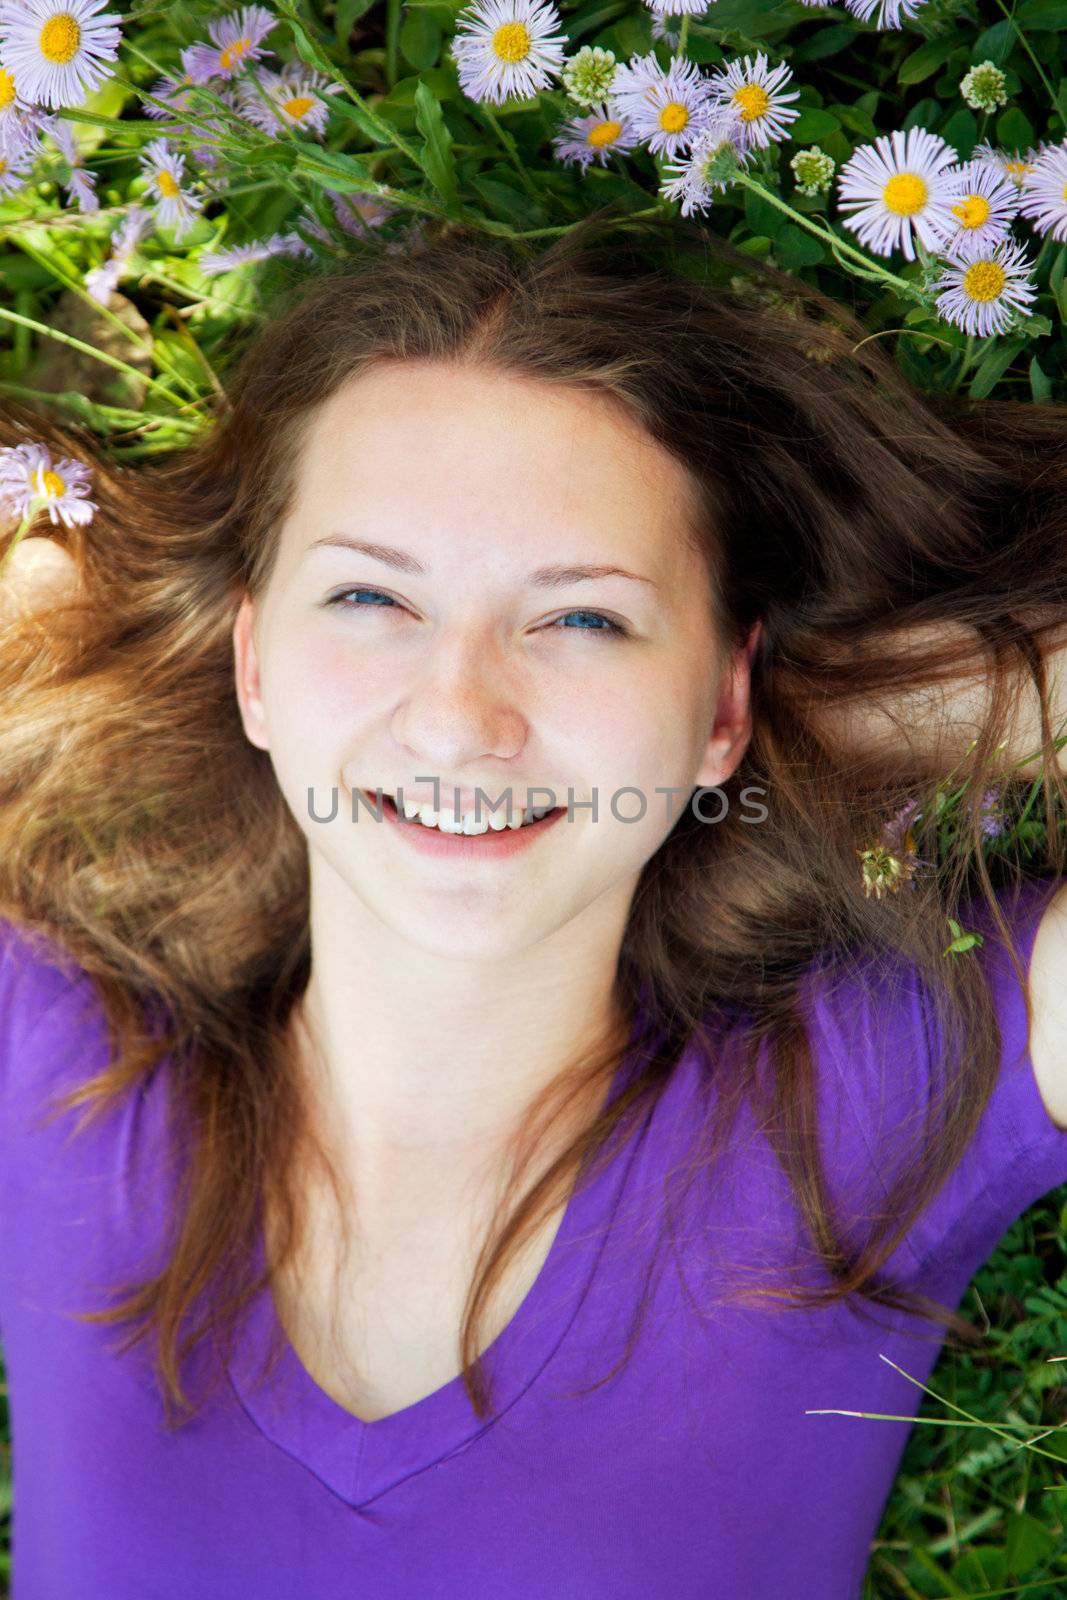 Teen girl lying in grass with flowers